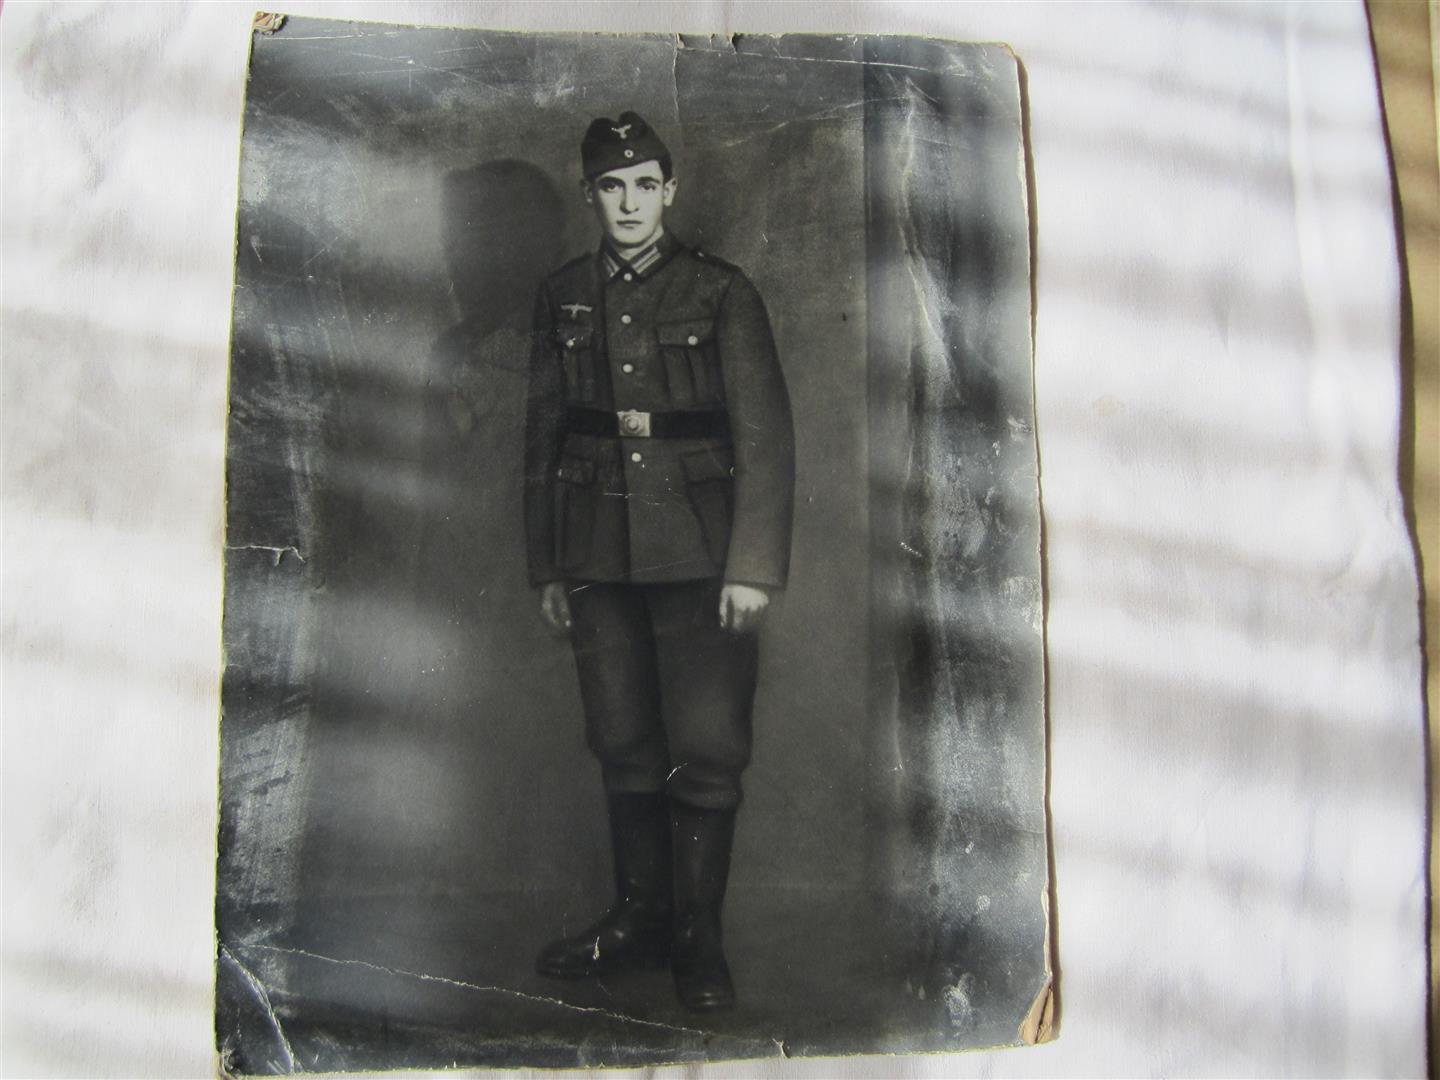 WW2 WH Soldier's Photo